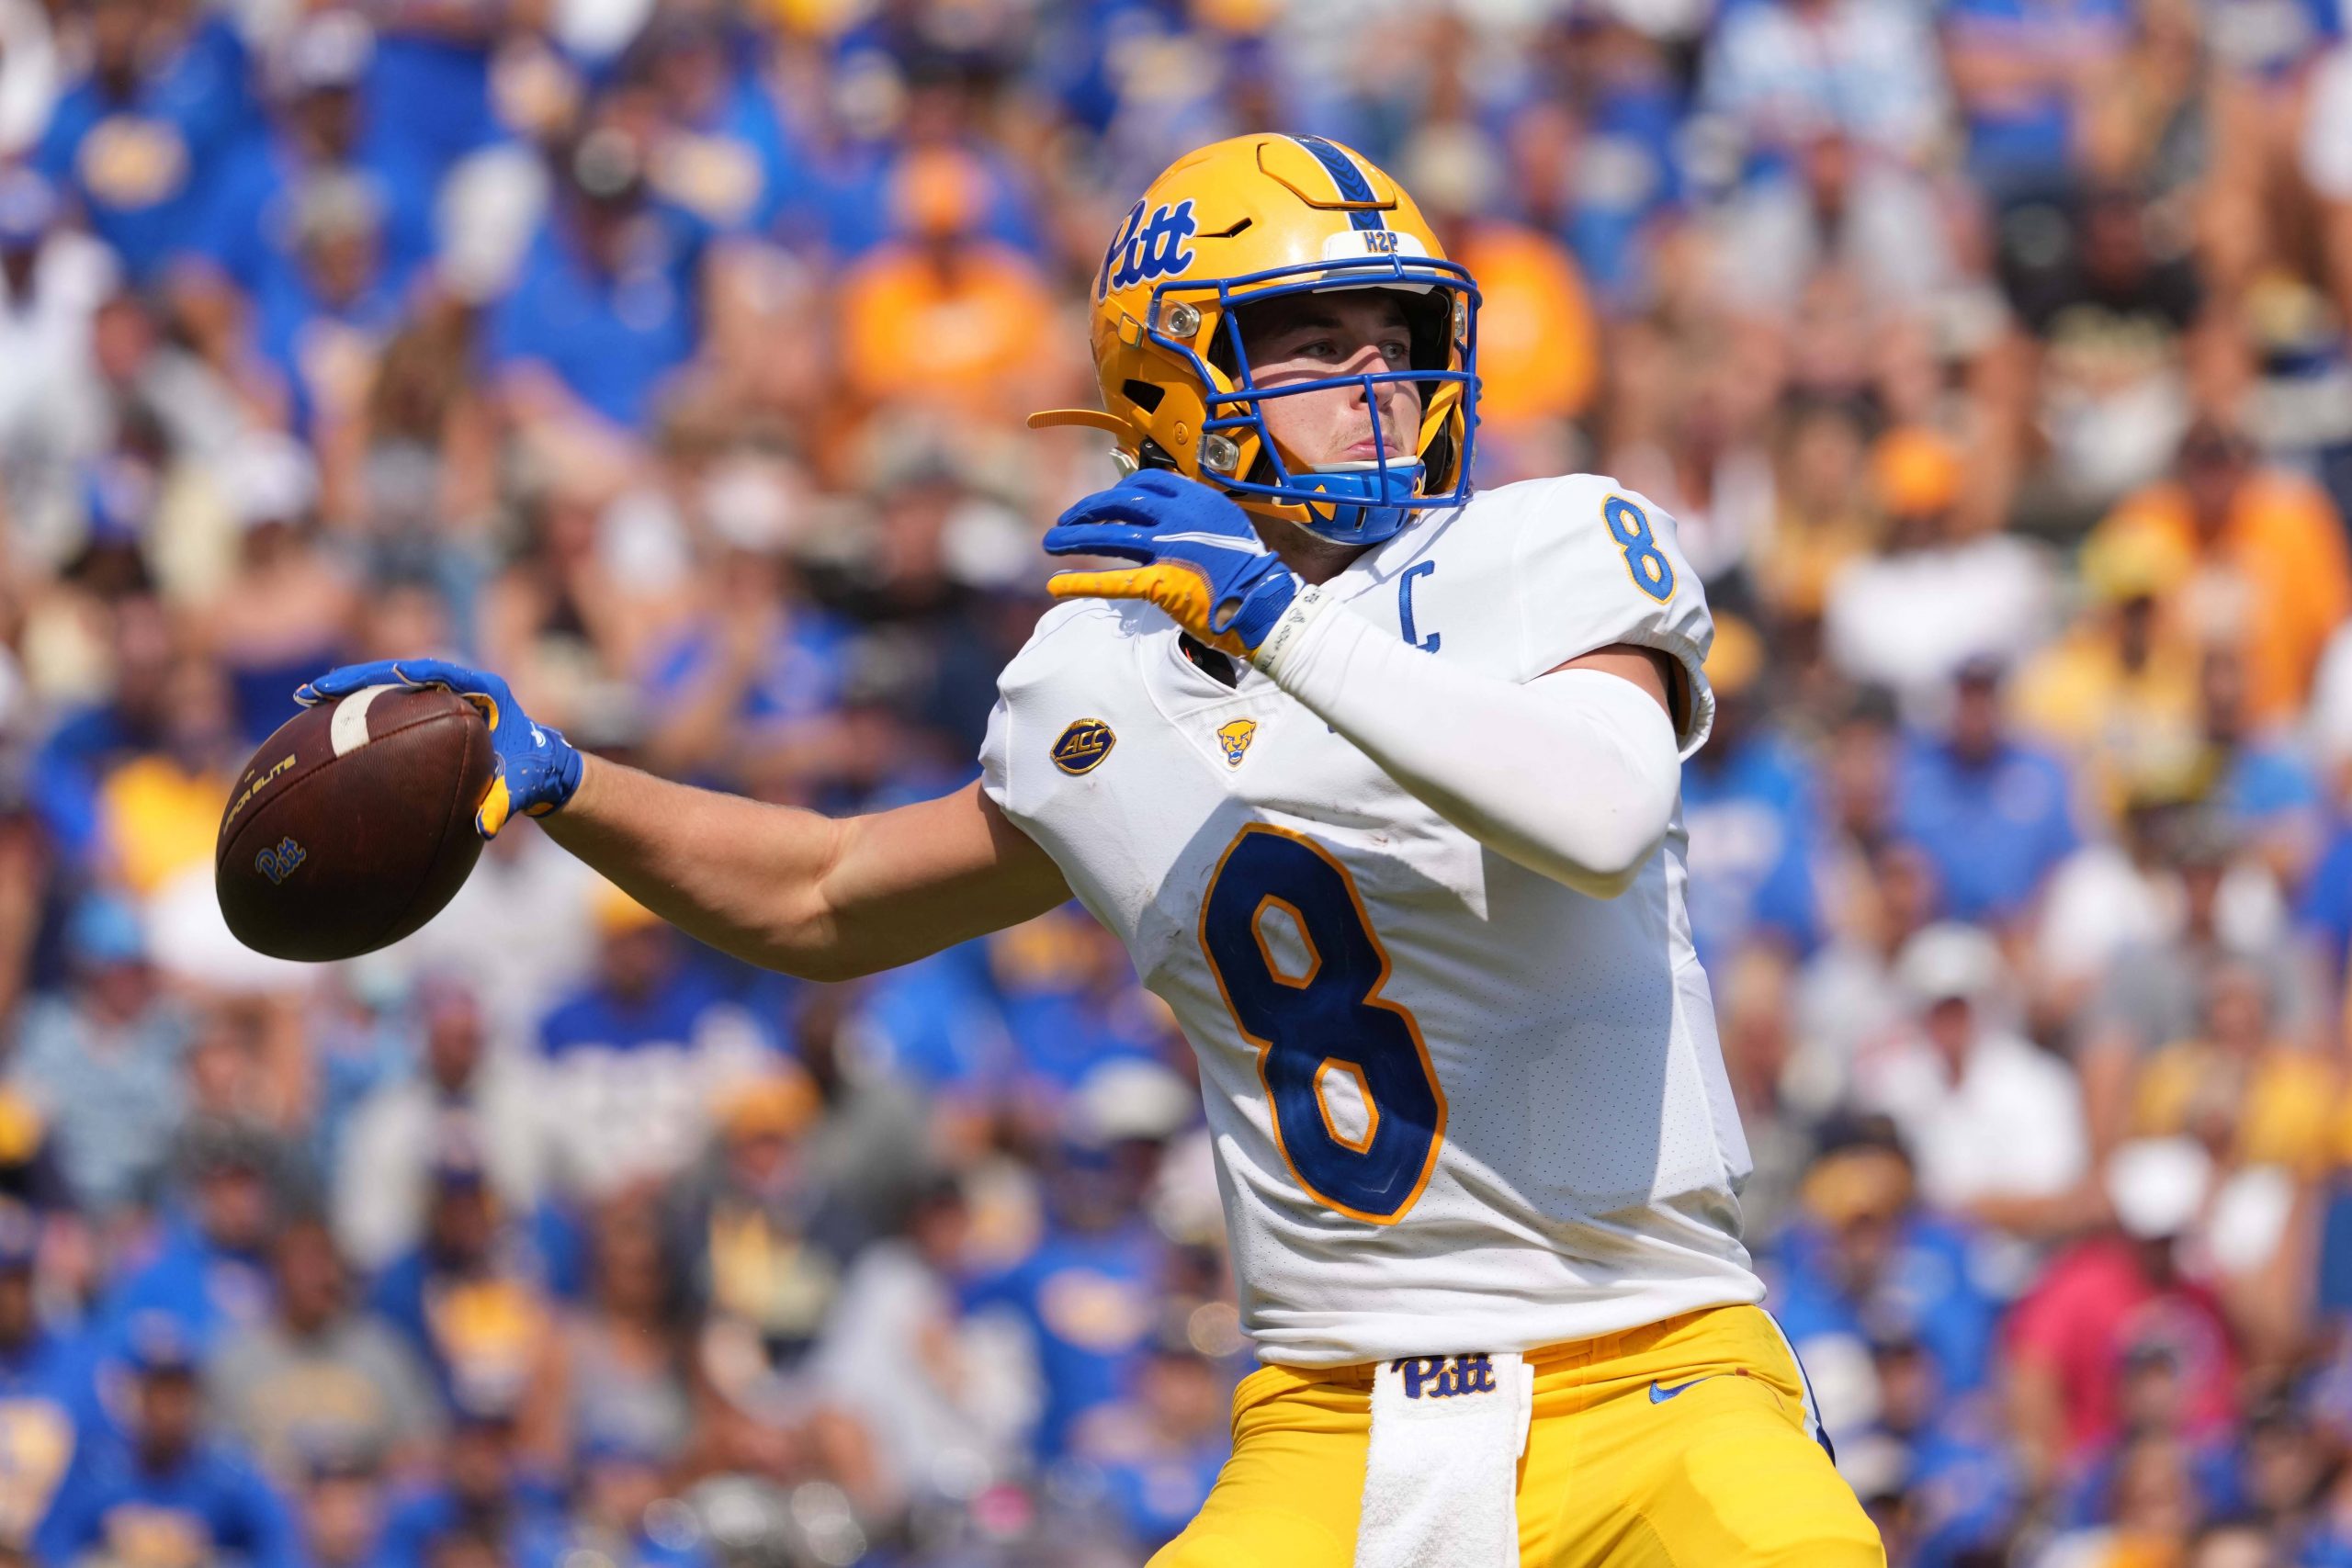 September 11, 2021: Pittsburgh Panthers quarterback Kenny Pickett 8 prepares to throw the ball during the NCAA, College